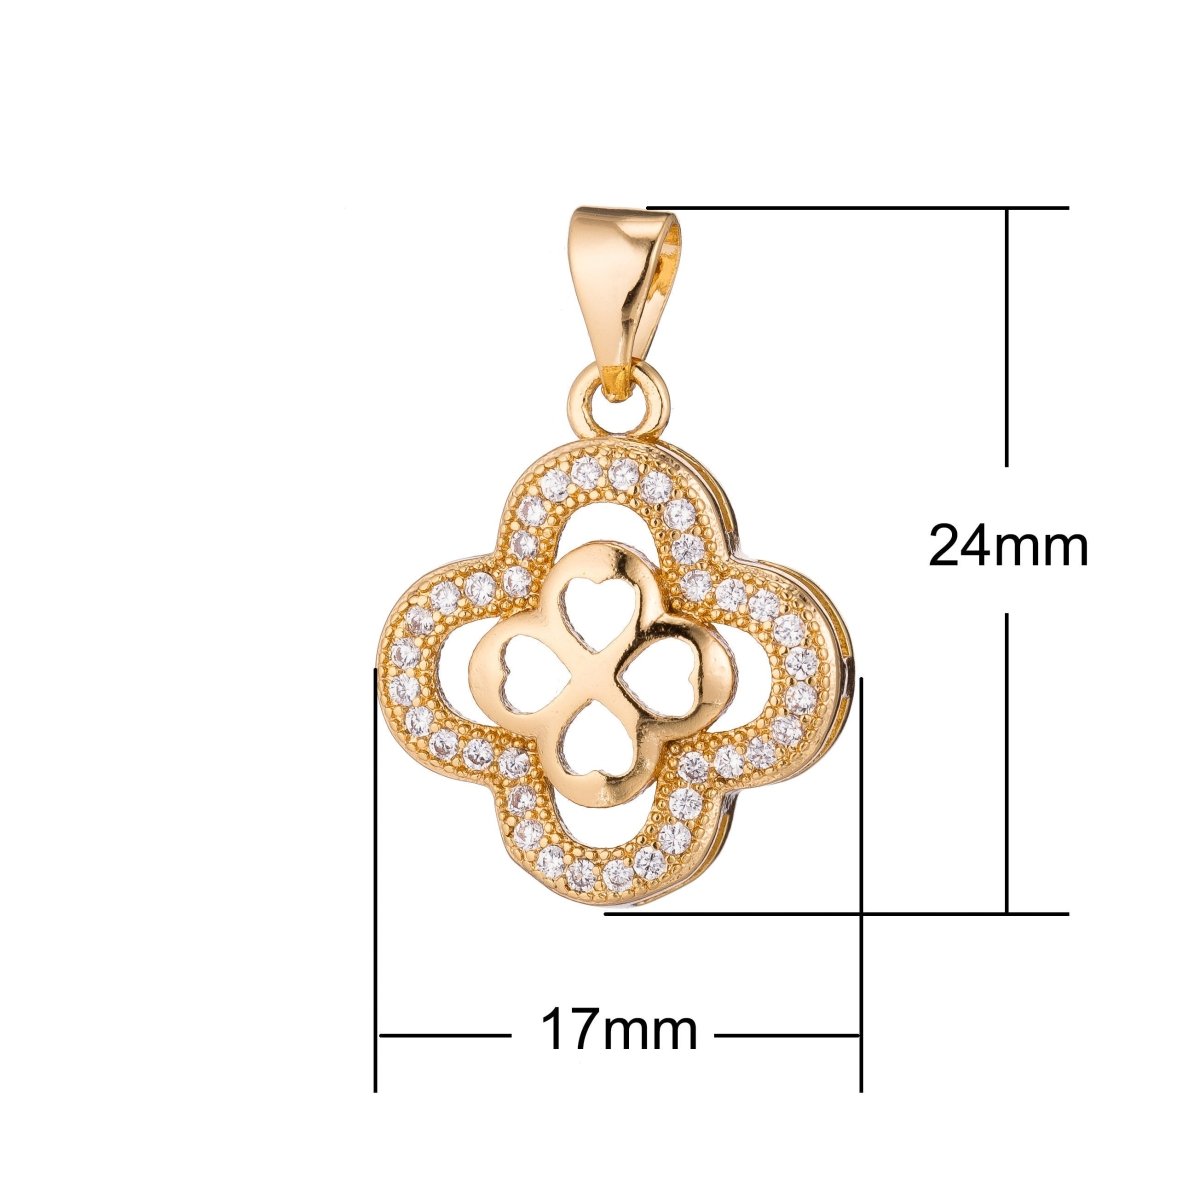 Gold Filled four leaf clover Flower Hearts, lucky Lover Heaven, Love, Romantic, Cubic Zirconia Necklace Pendant Charm for jewelry making I-346 - DLUXCA